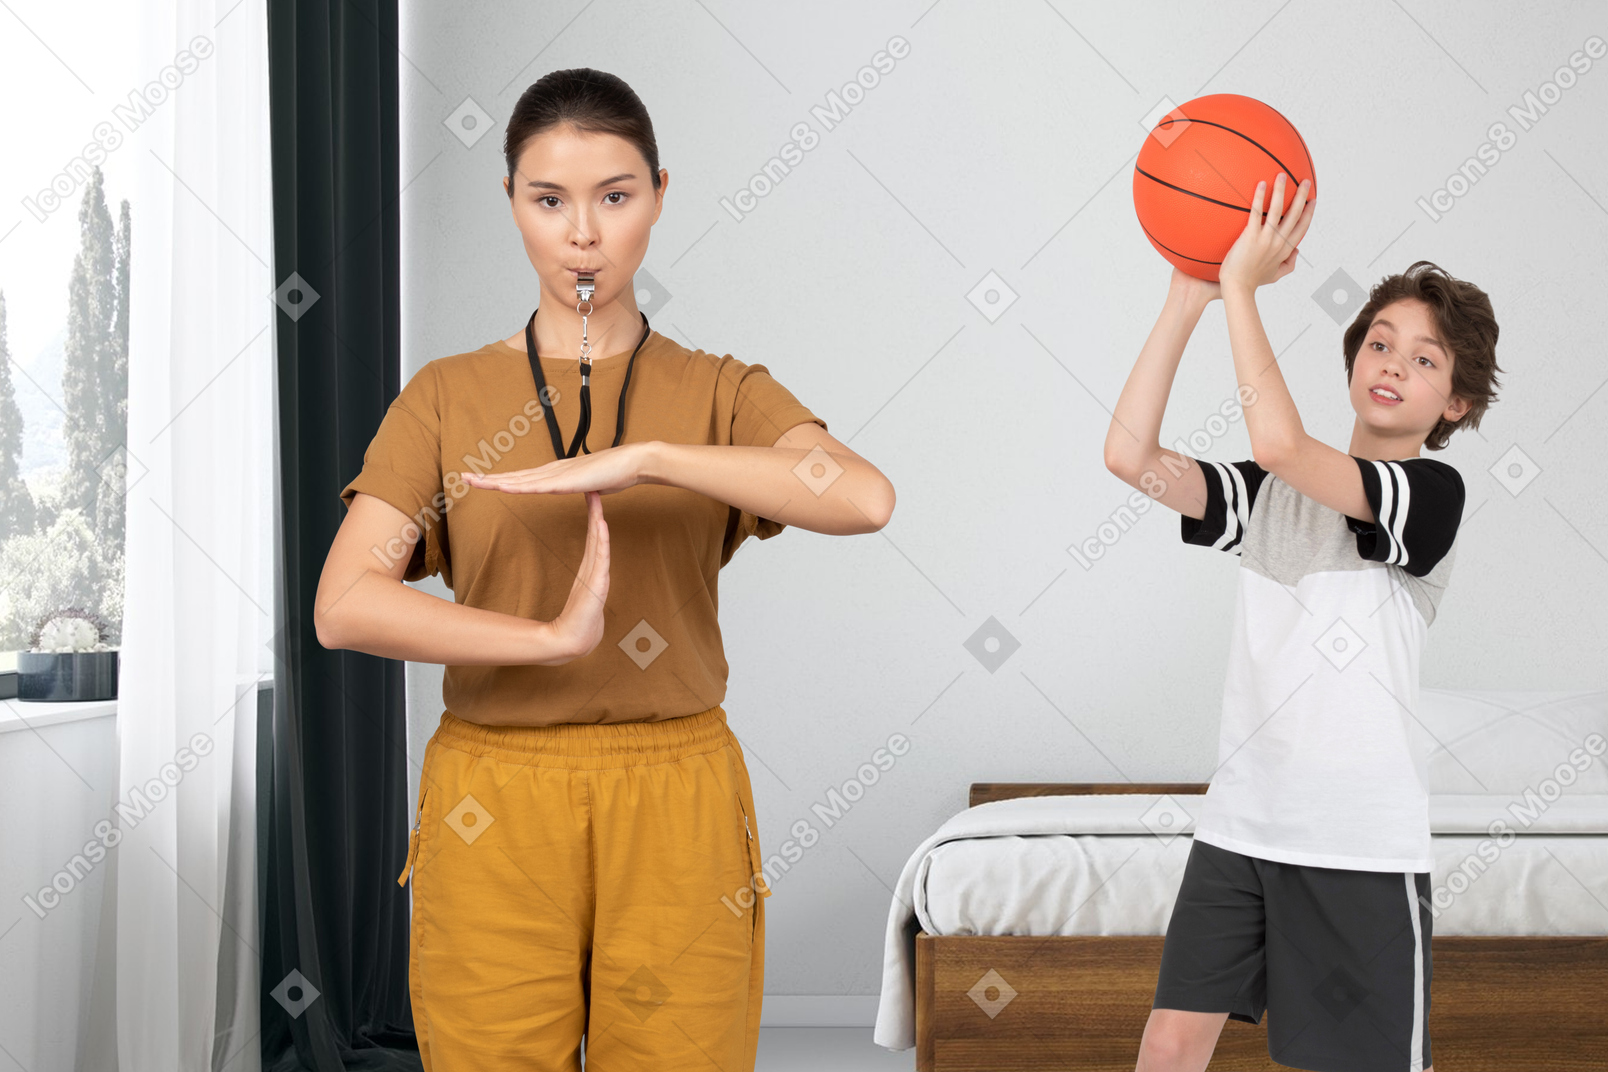 Man playing basketball with a boy